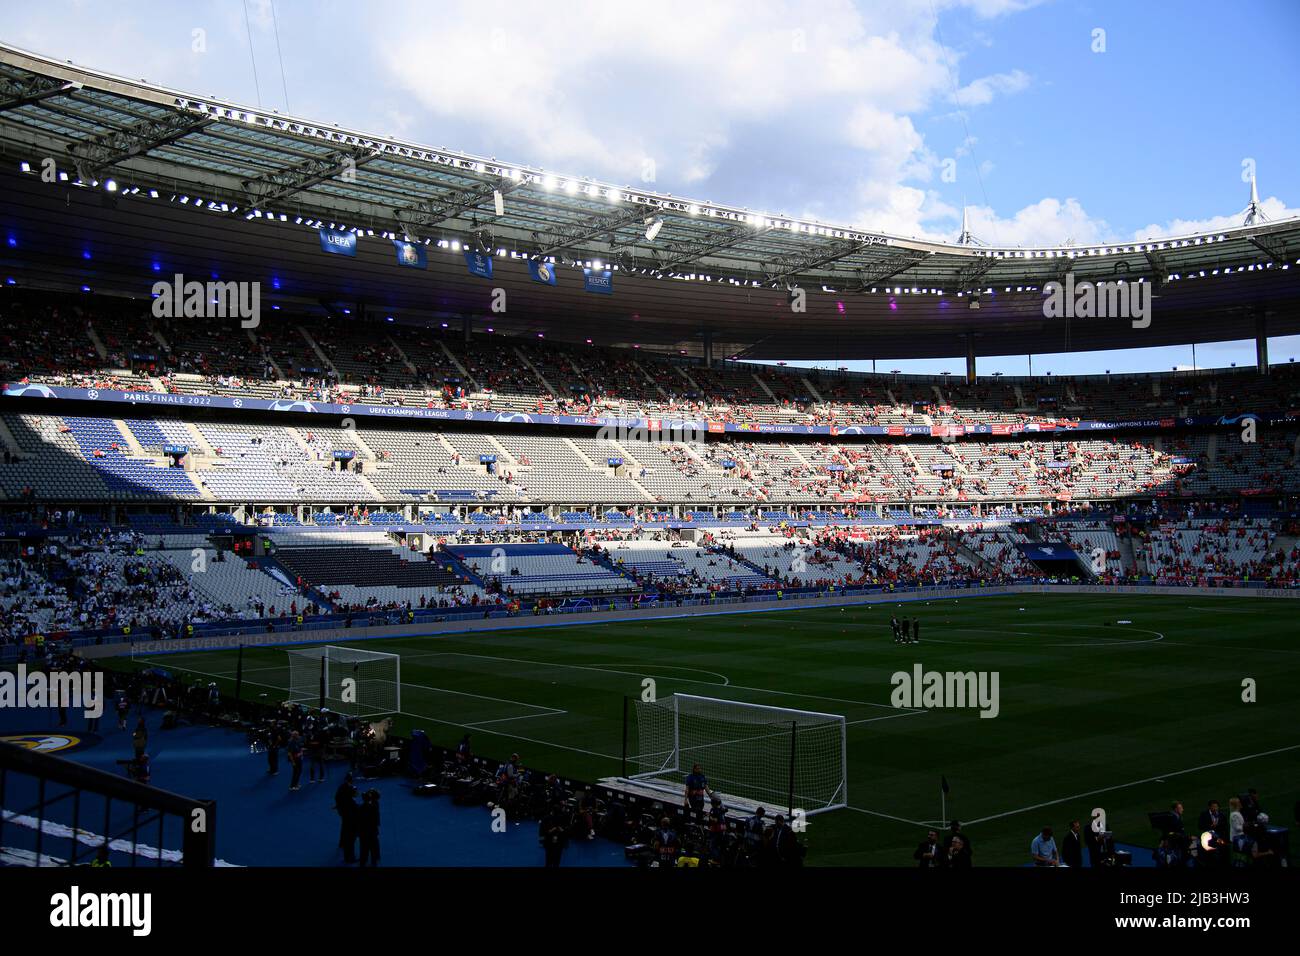 Interior view Stade de France, overview, football Champions League final 2022, Liverpool FC (LFC) - Real Madrid (Real) 0: 1, on May 28th, 2022 in Paris/France. Â Stock Photo